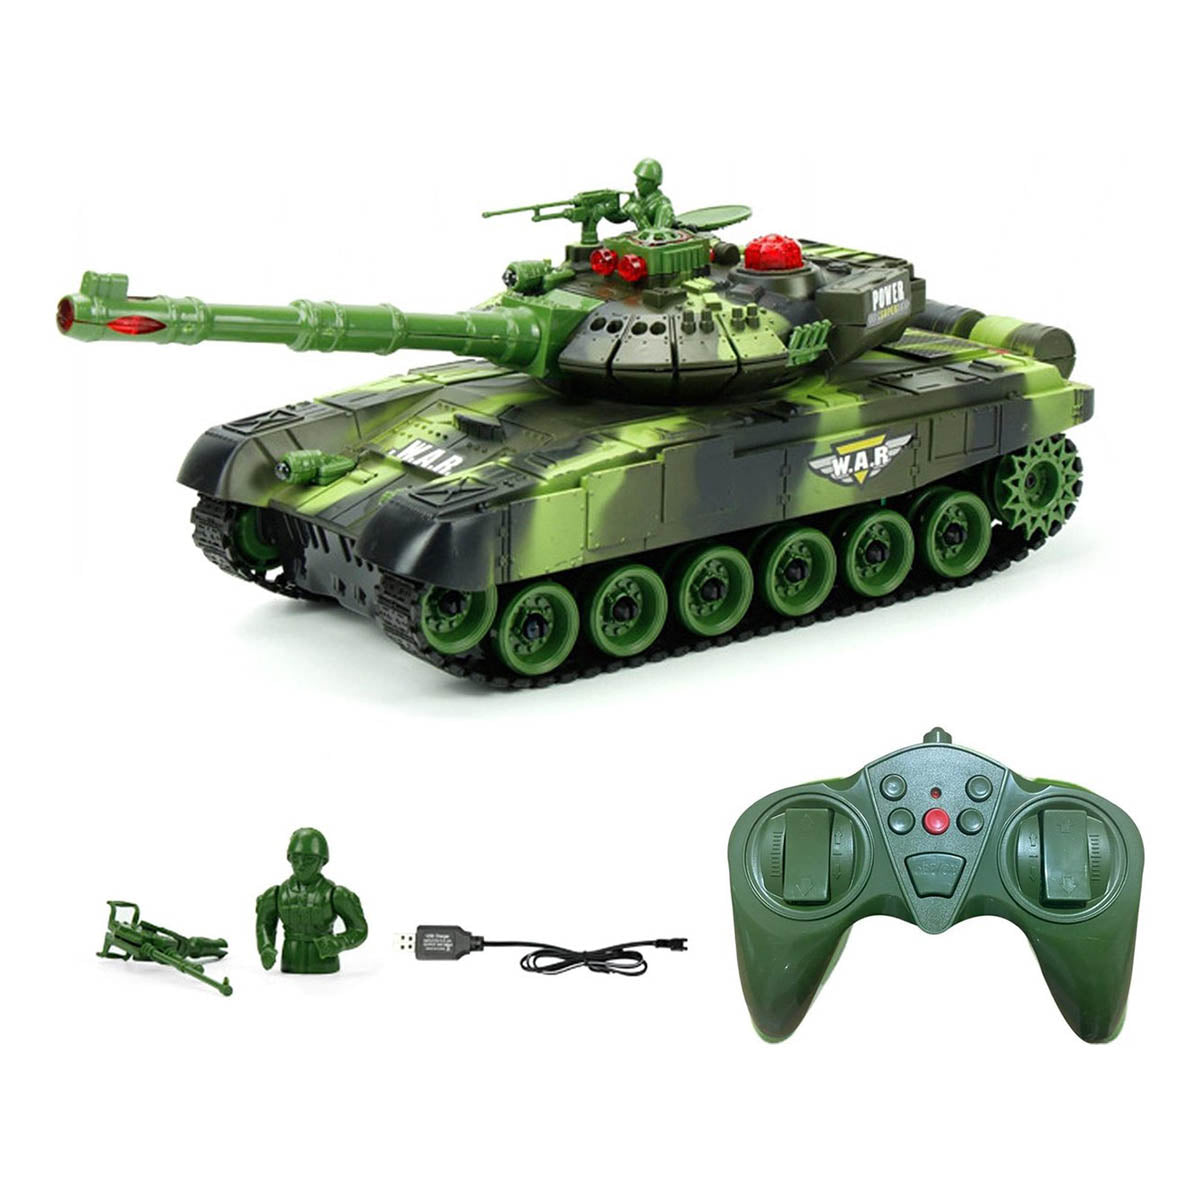 <tc>Ariko XXL RC Toy Tank - Green - Remote Controlled Radio Tank With Remote Control - With Sound & Light Effects - With Internal Battery - 2.4Gz - Scale 1:14</tc>